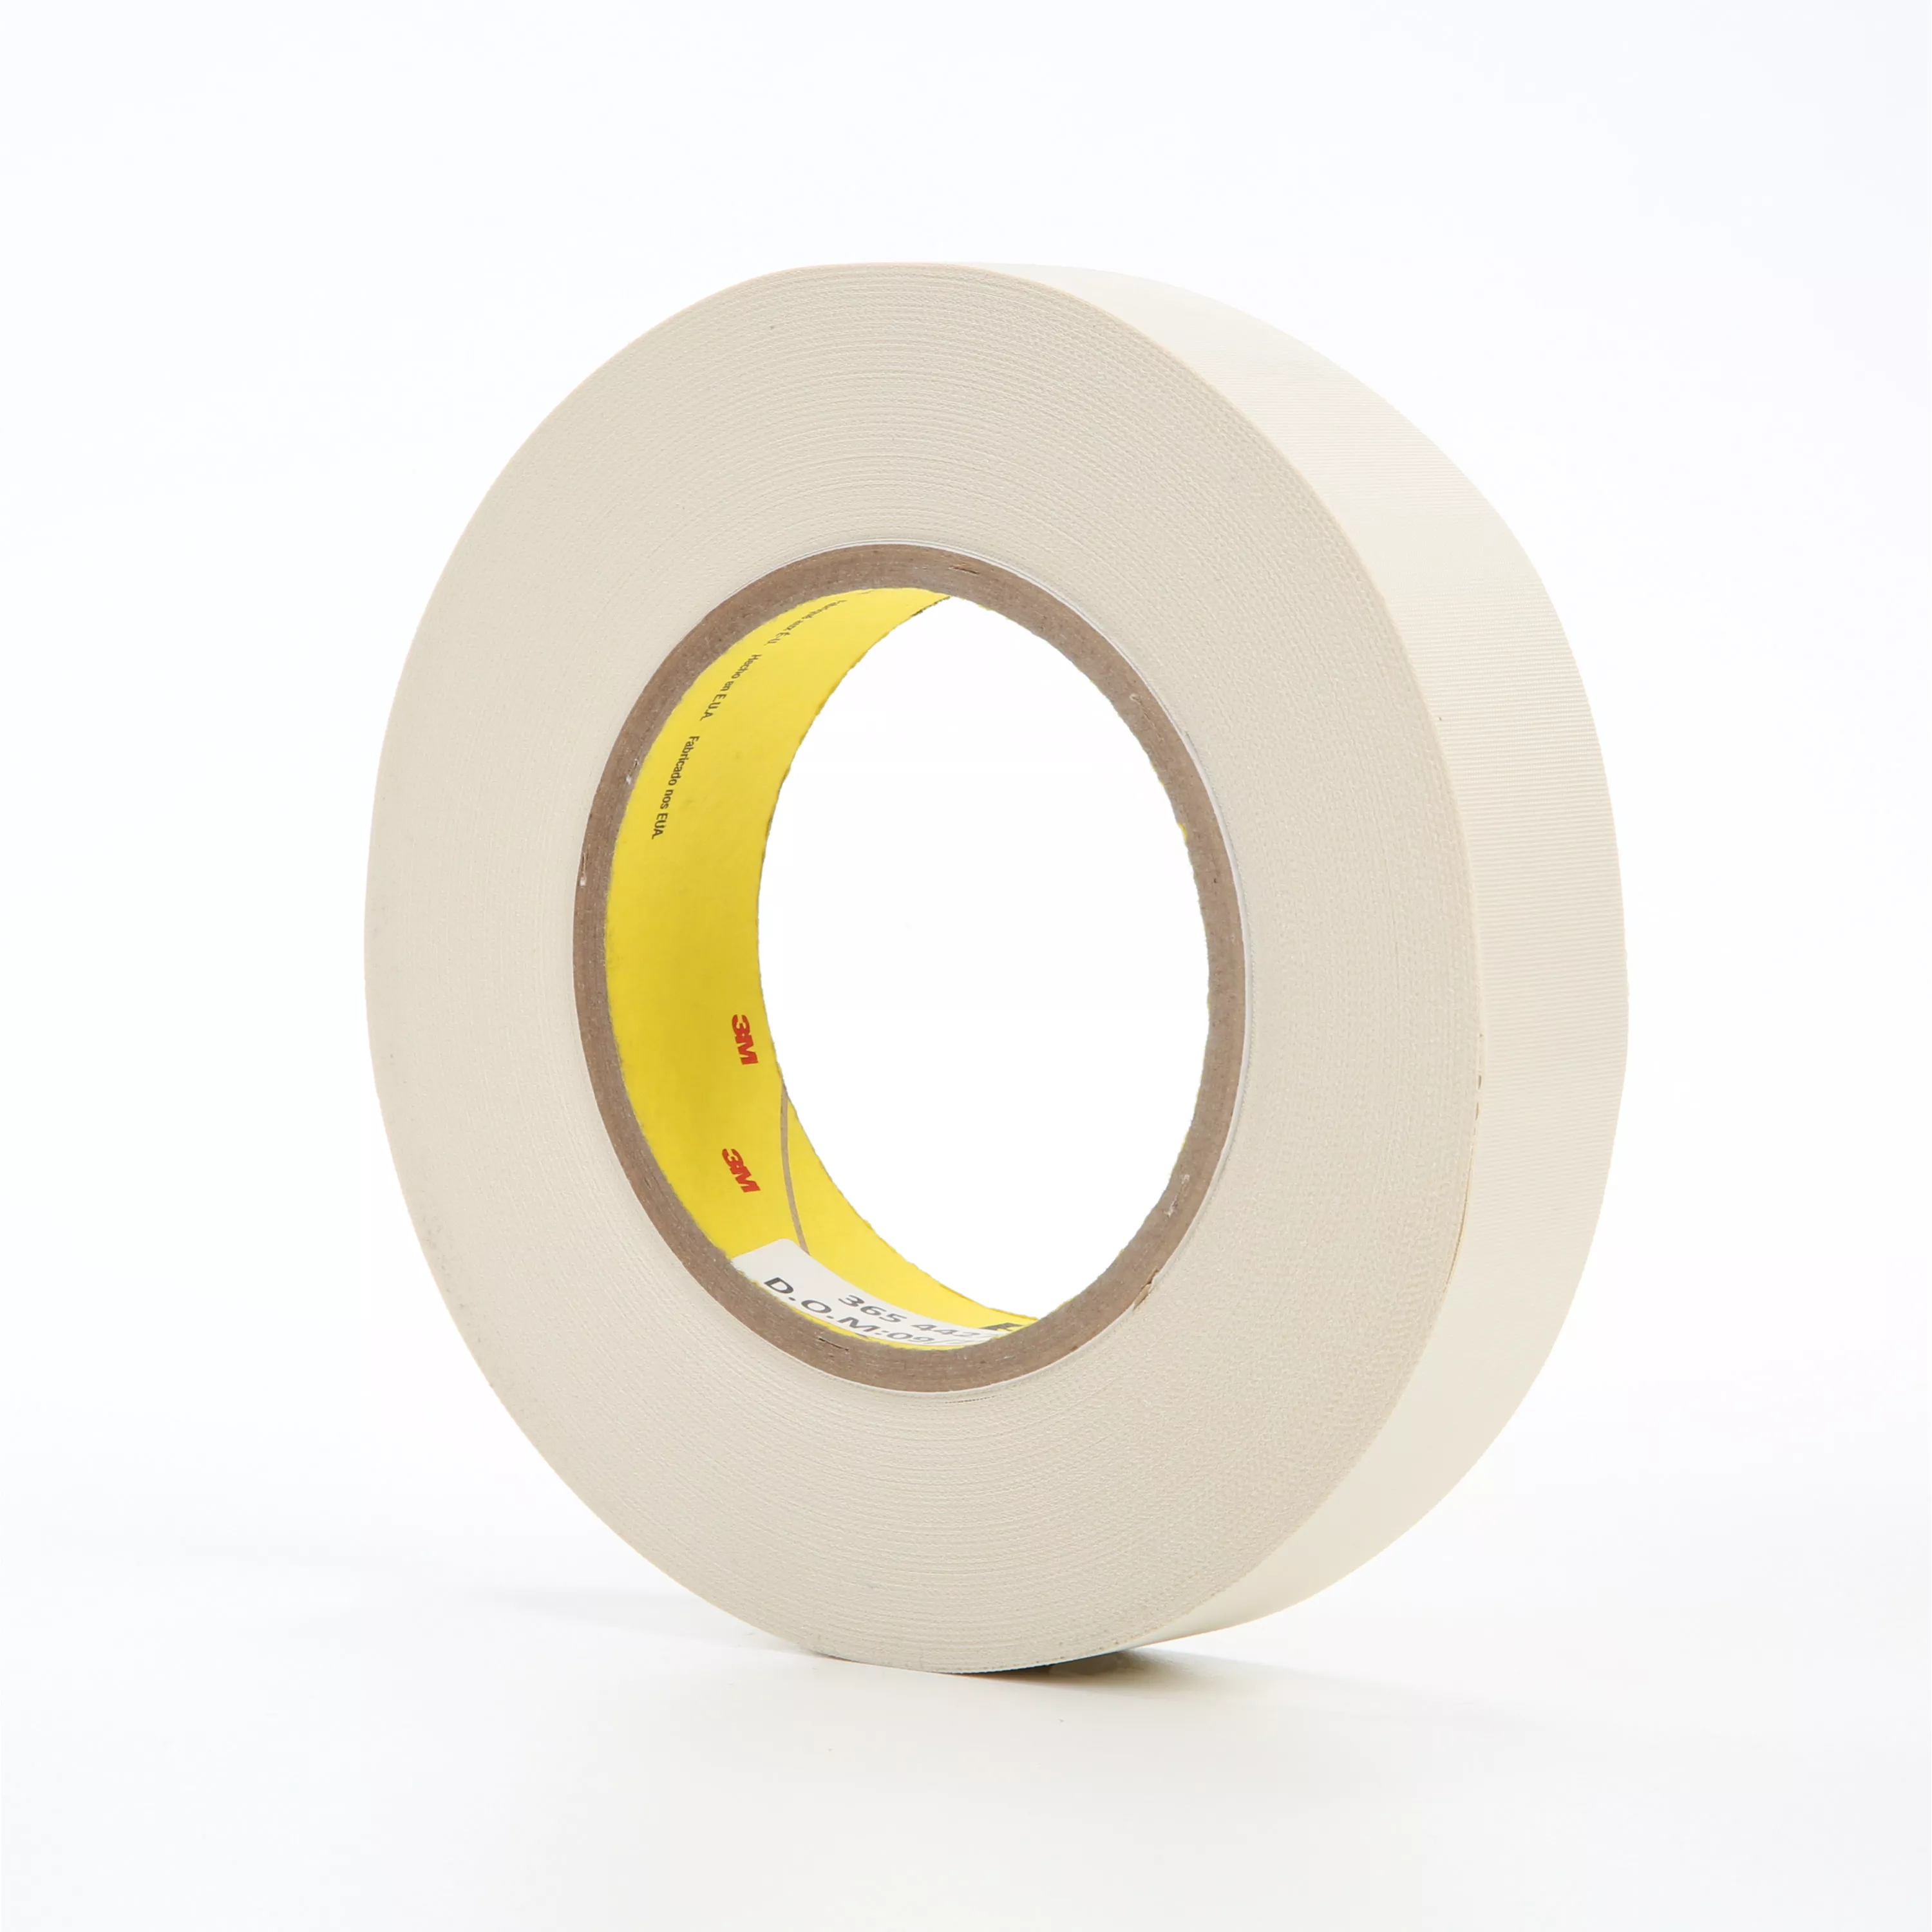 3M™ Thermosetable Glass Cloth Tape 365, White, 1 in x 60 yd, 8.3 mil, 36
Roll/Case